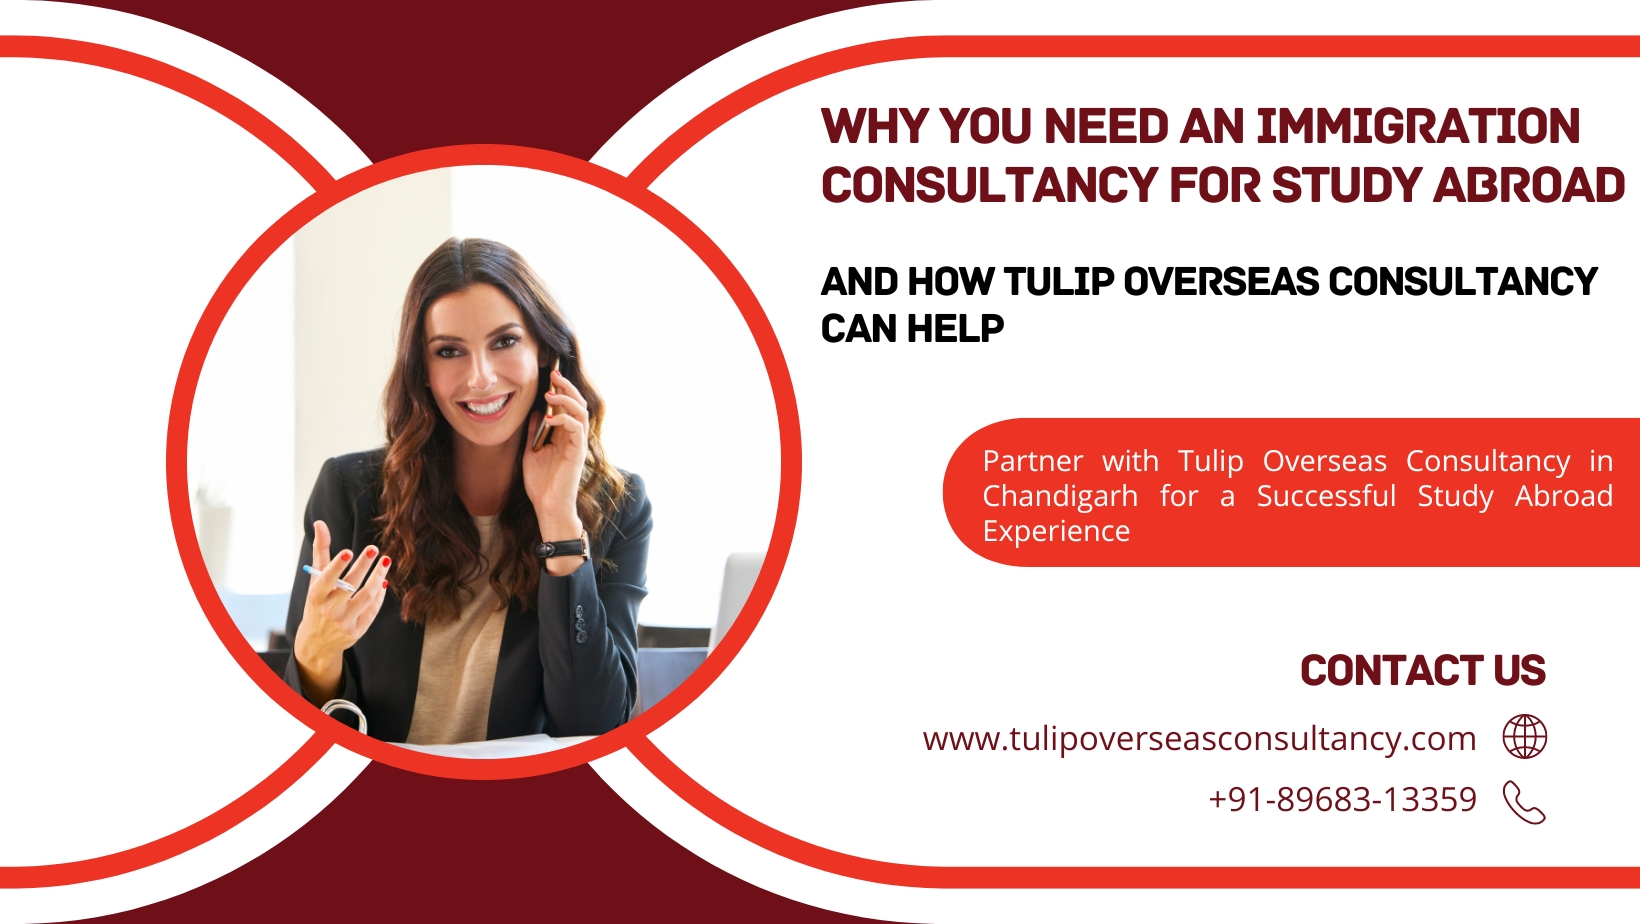 Why You Need an Immigration Consultancy for Study Abroad and How Tulip Overseas Consultancy Can Help